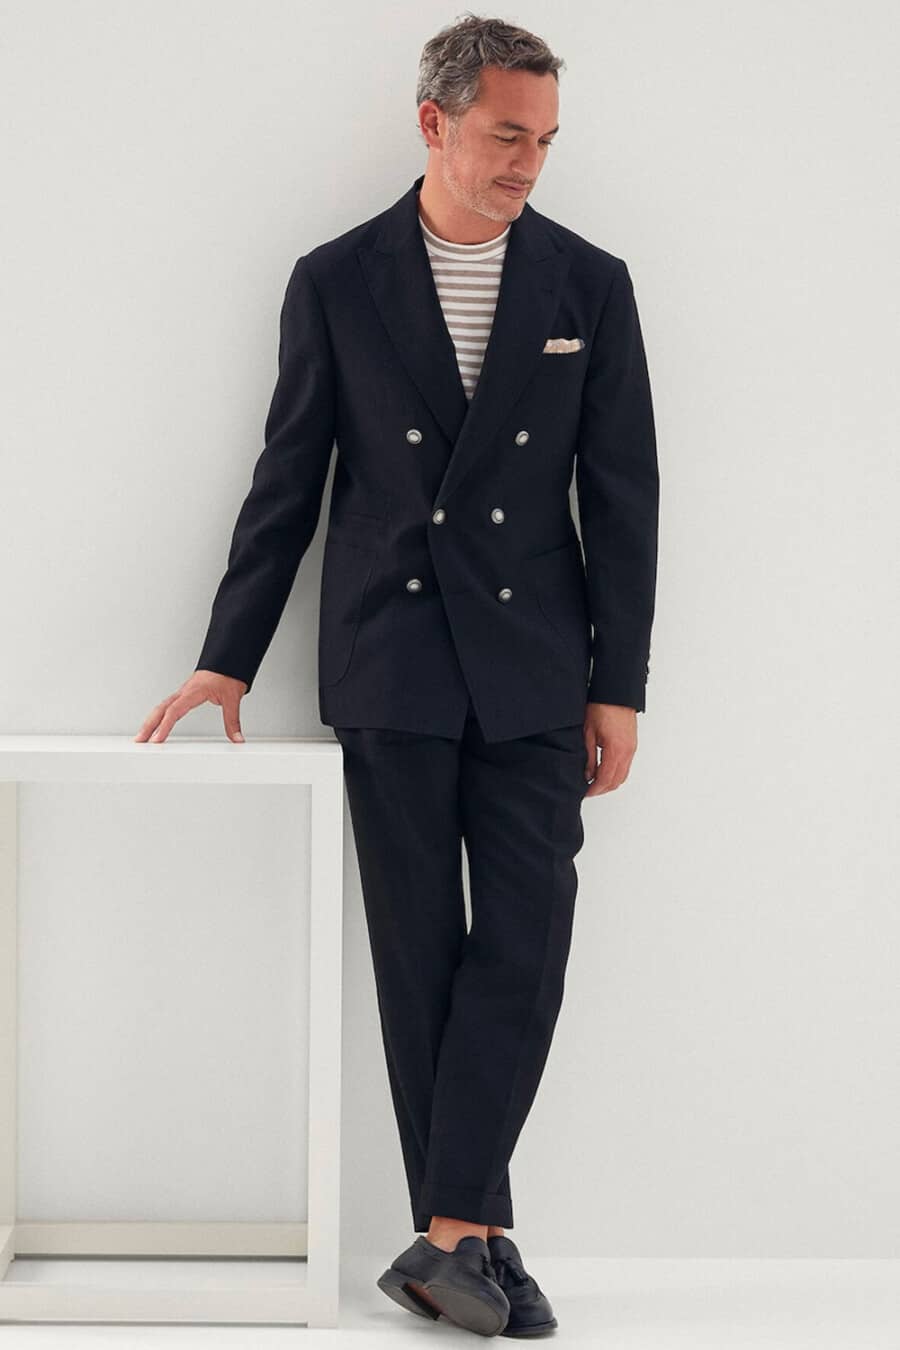 Men's double-breasted navy suit, striped T-shirt and black tassel loafers outfit